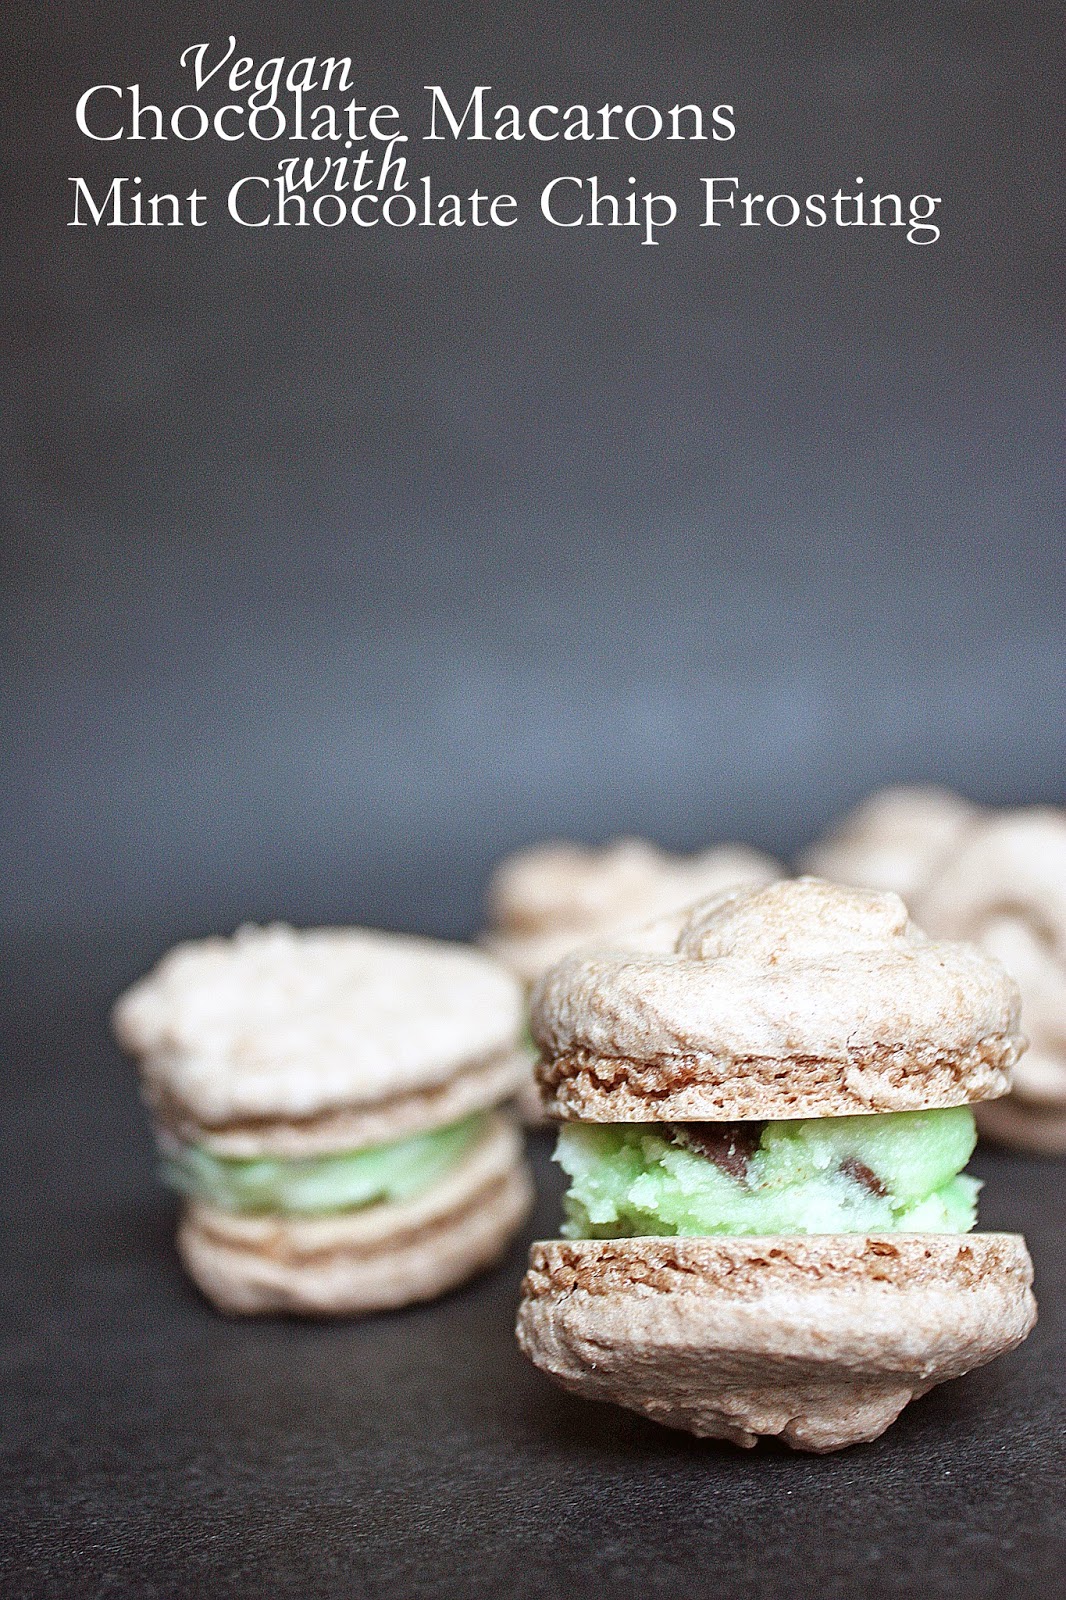 Gluten-free vegan chocolate macarons with mint chocolate chip frosting